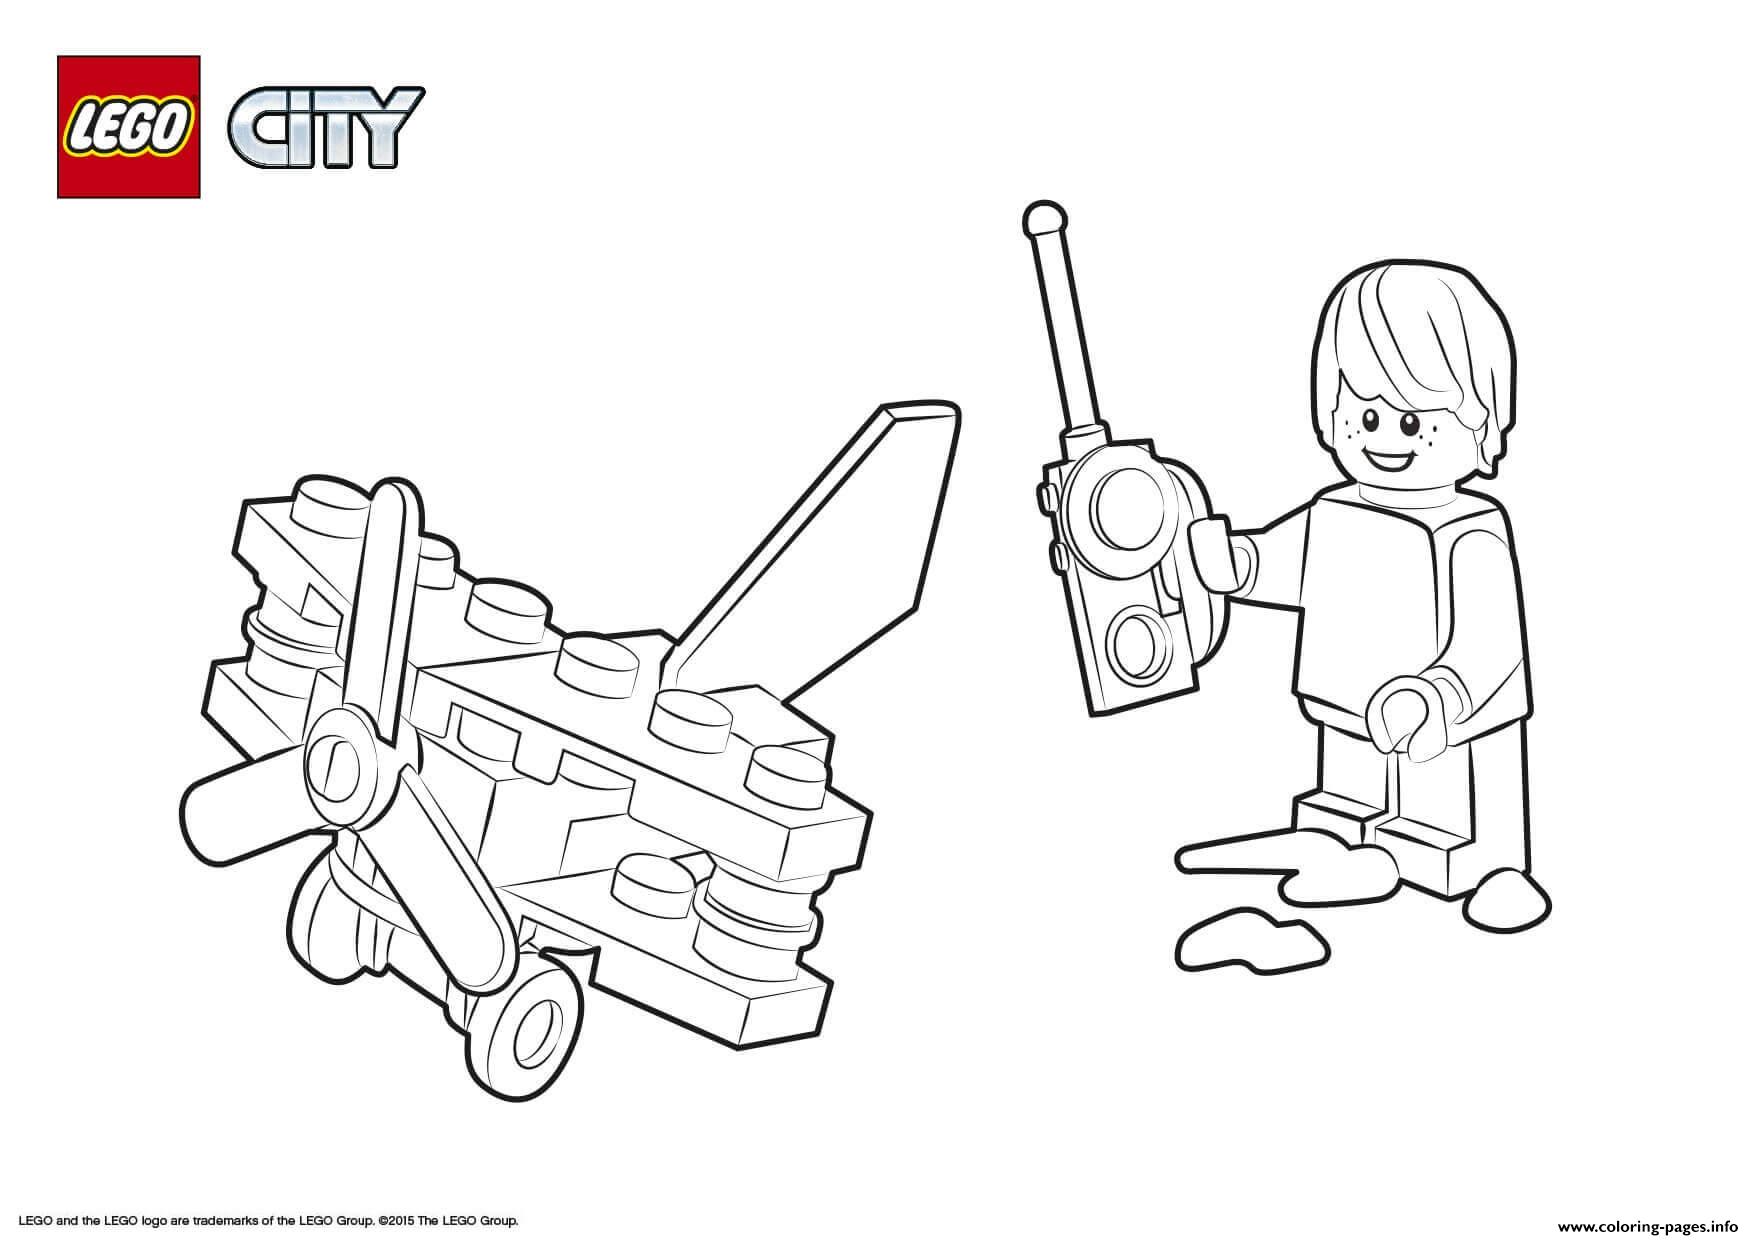 Download Lego City Small Plane Coloring Pages Printable